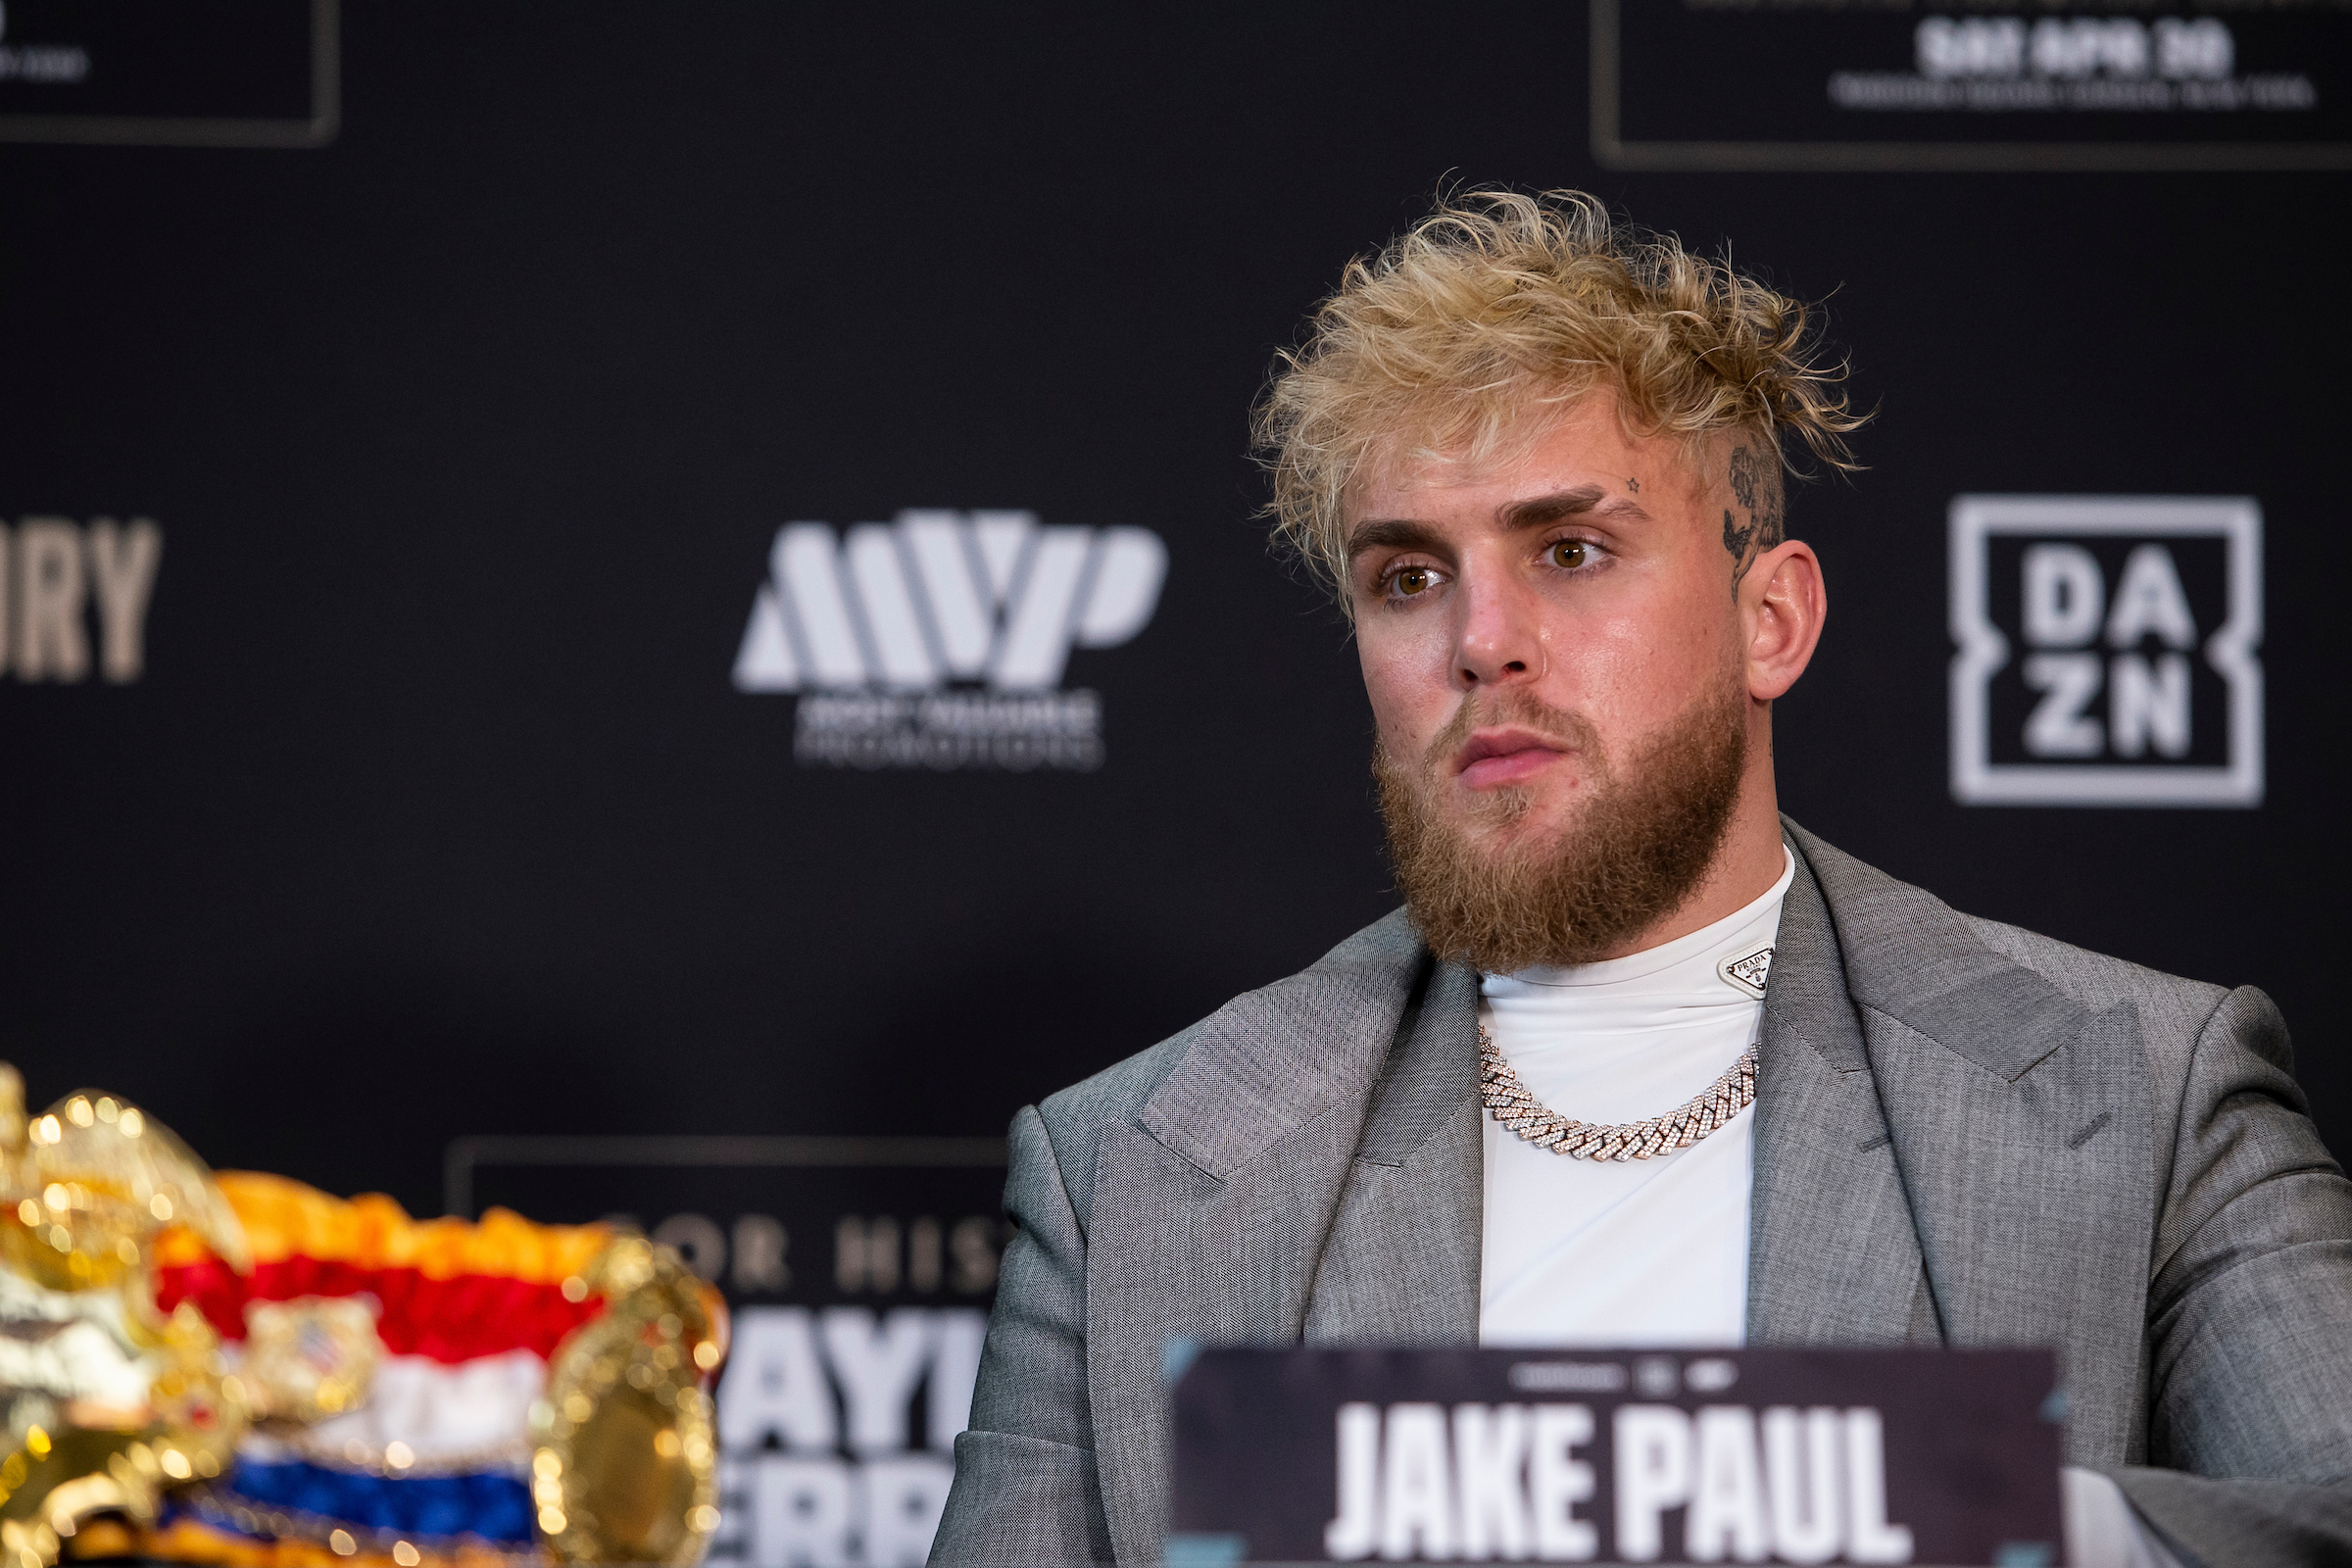 February 2, 2022; New York, NY; Jake Paul of MVP speaks at the press conference for the upcoming Matchroom Boxing fight card on April 30, 2022 at Madison Square Garden in New York City. Mandatory Credit: Michelle Farsi for Matchroom/MSG Photos